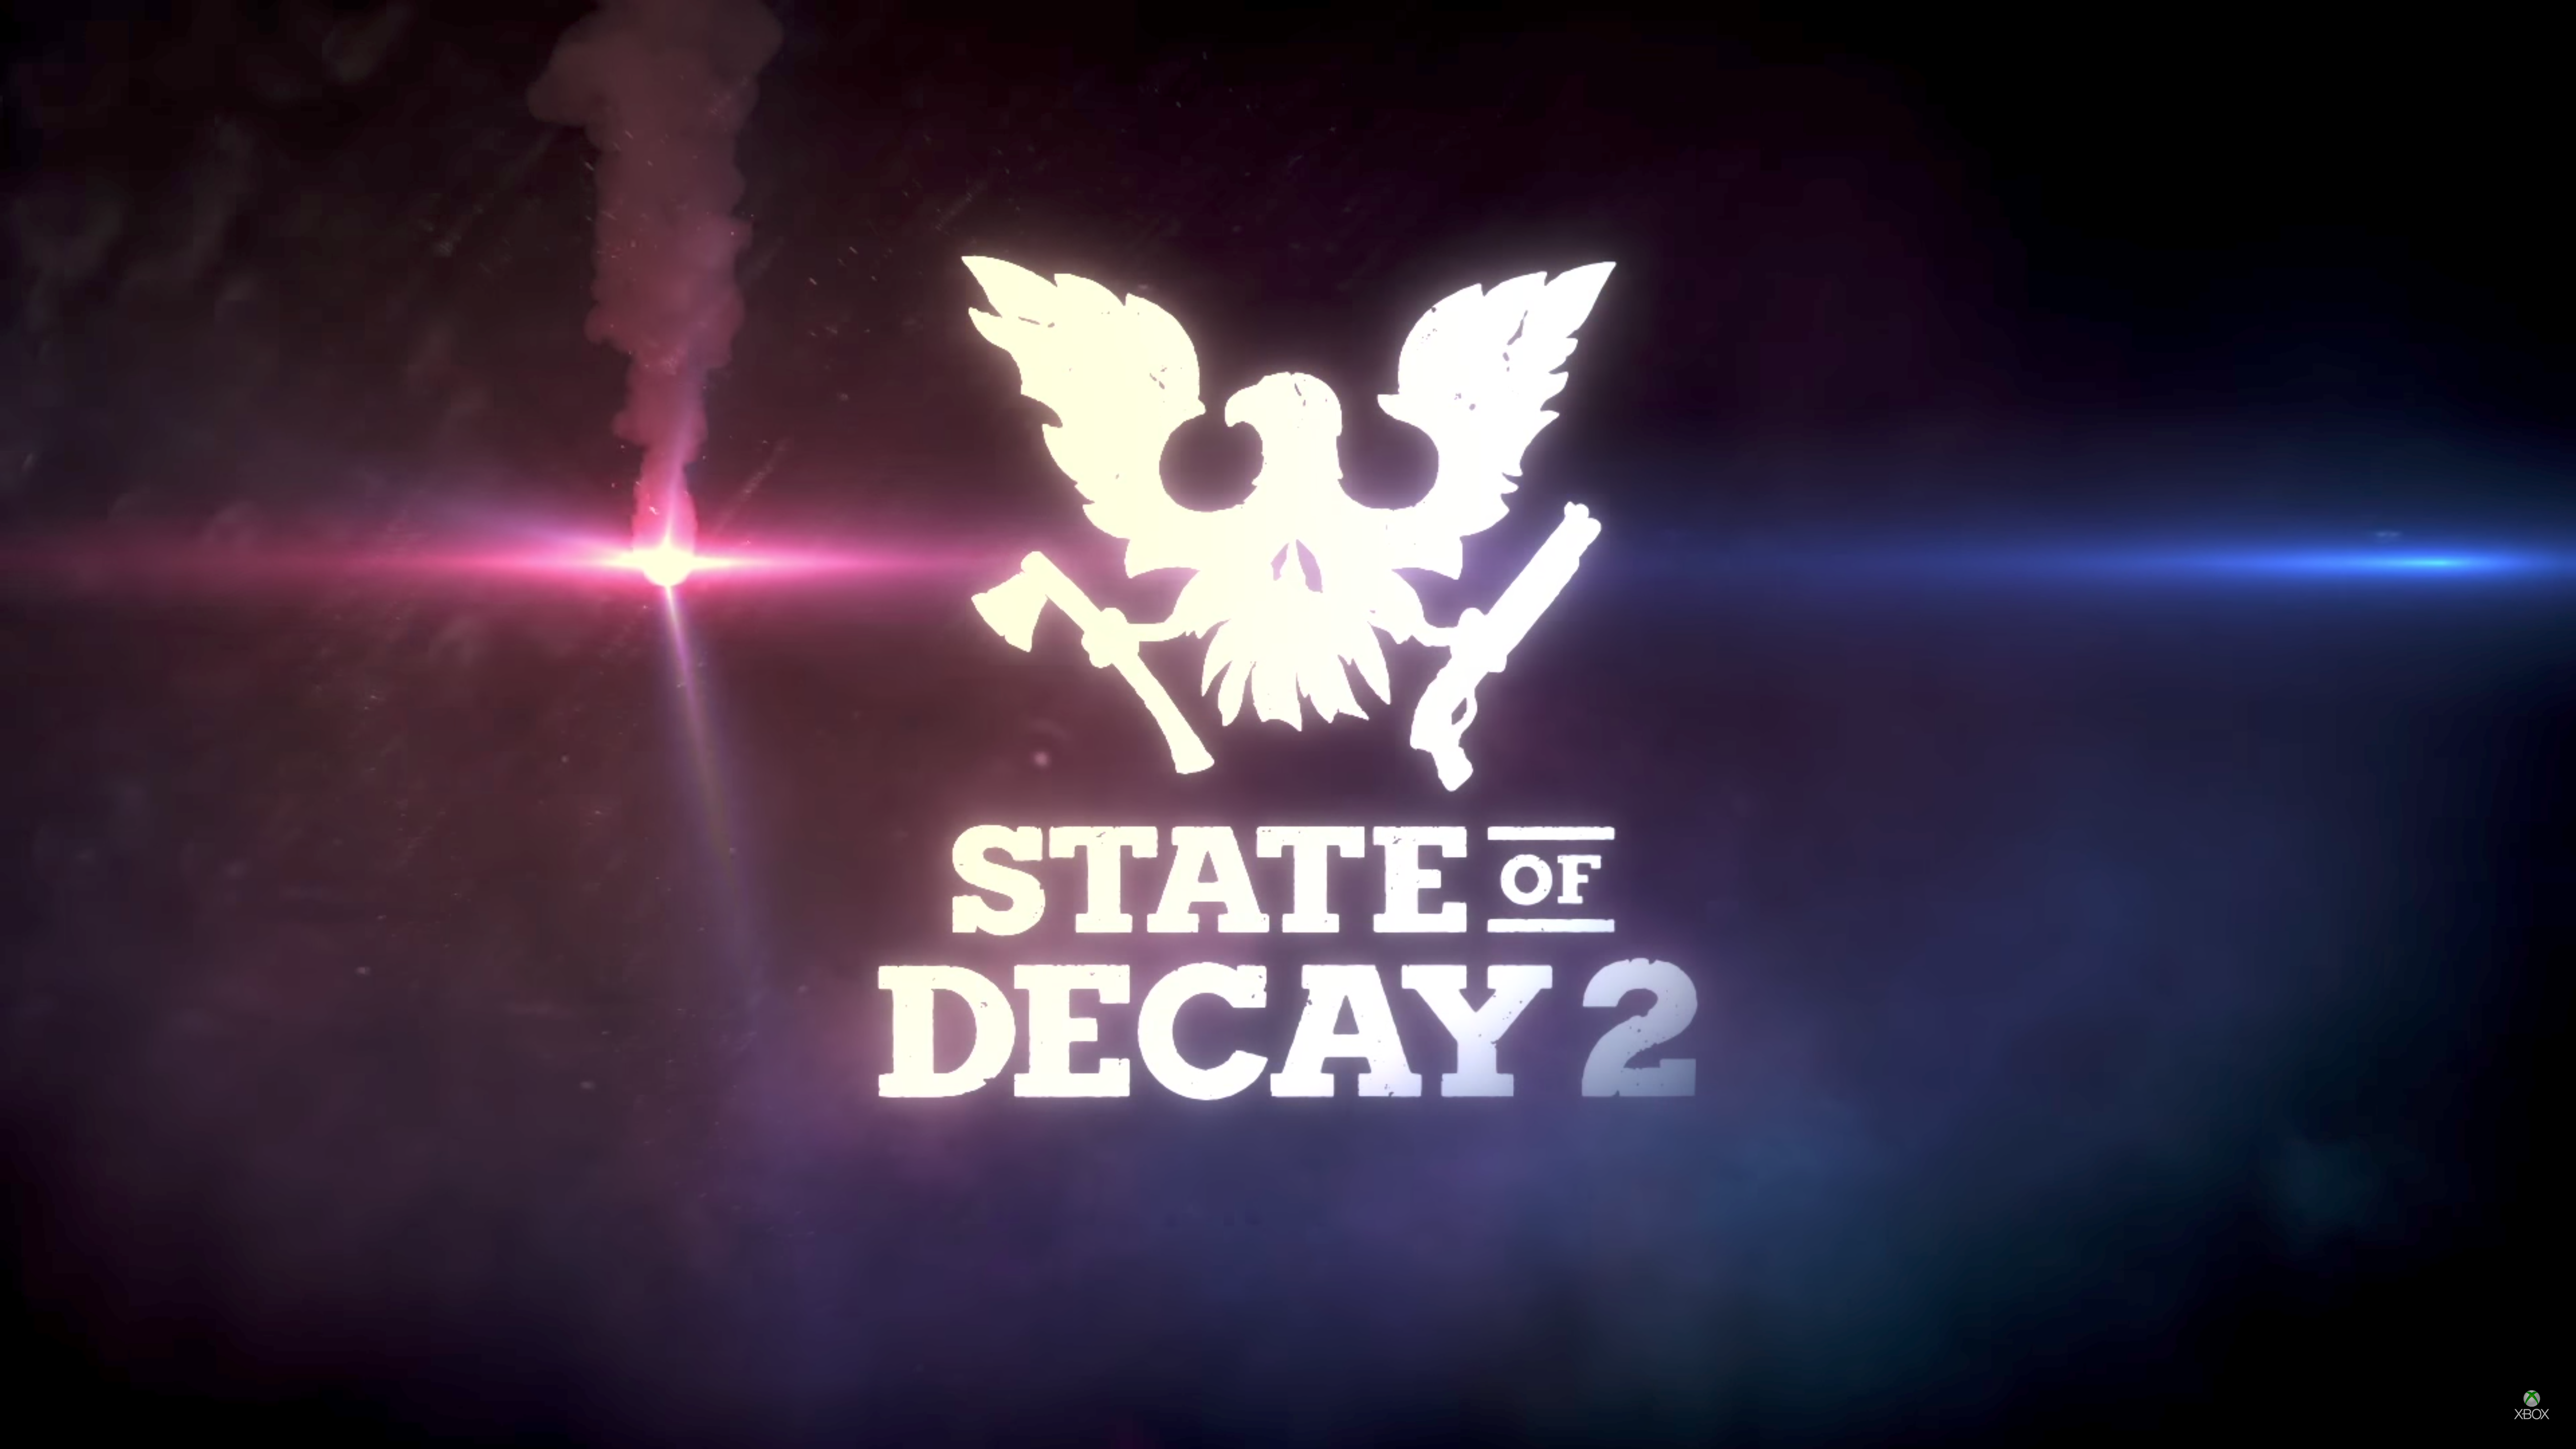 State Of Decay 2 Debuts New Trailer at Xbox Conference